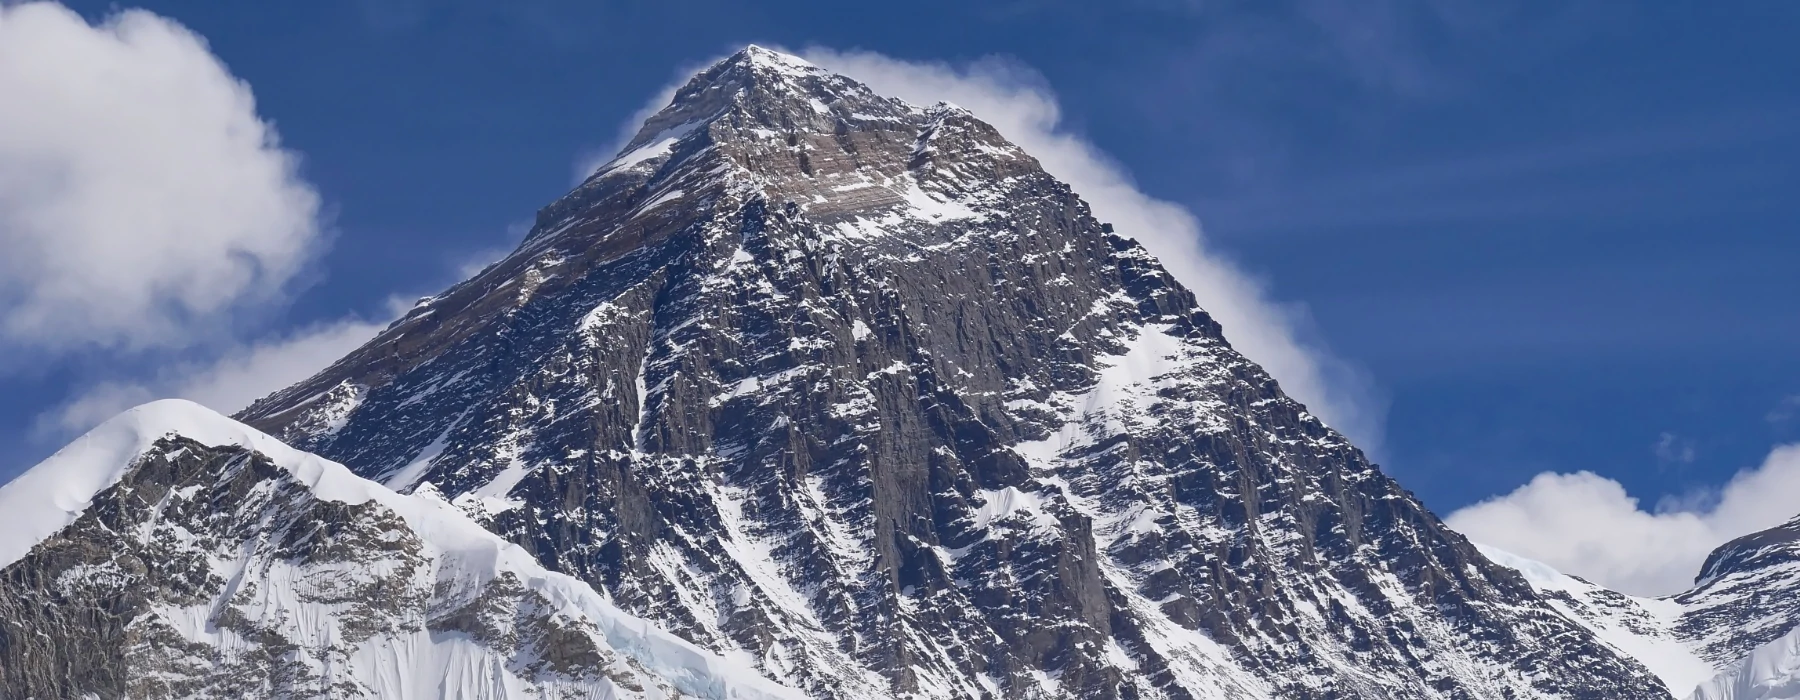 Climb Everest – South Col Route